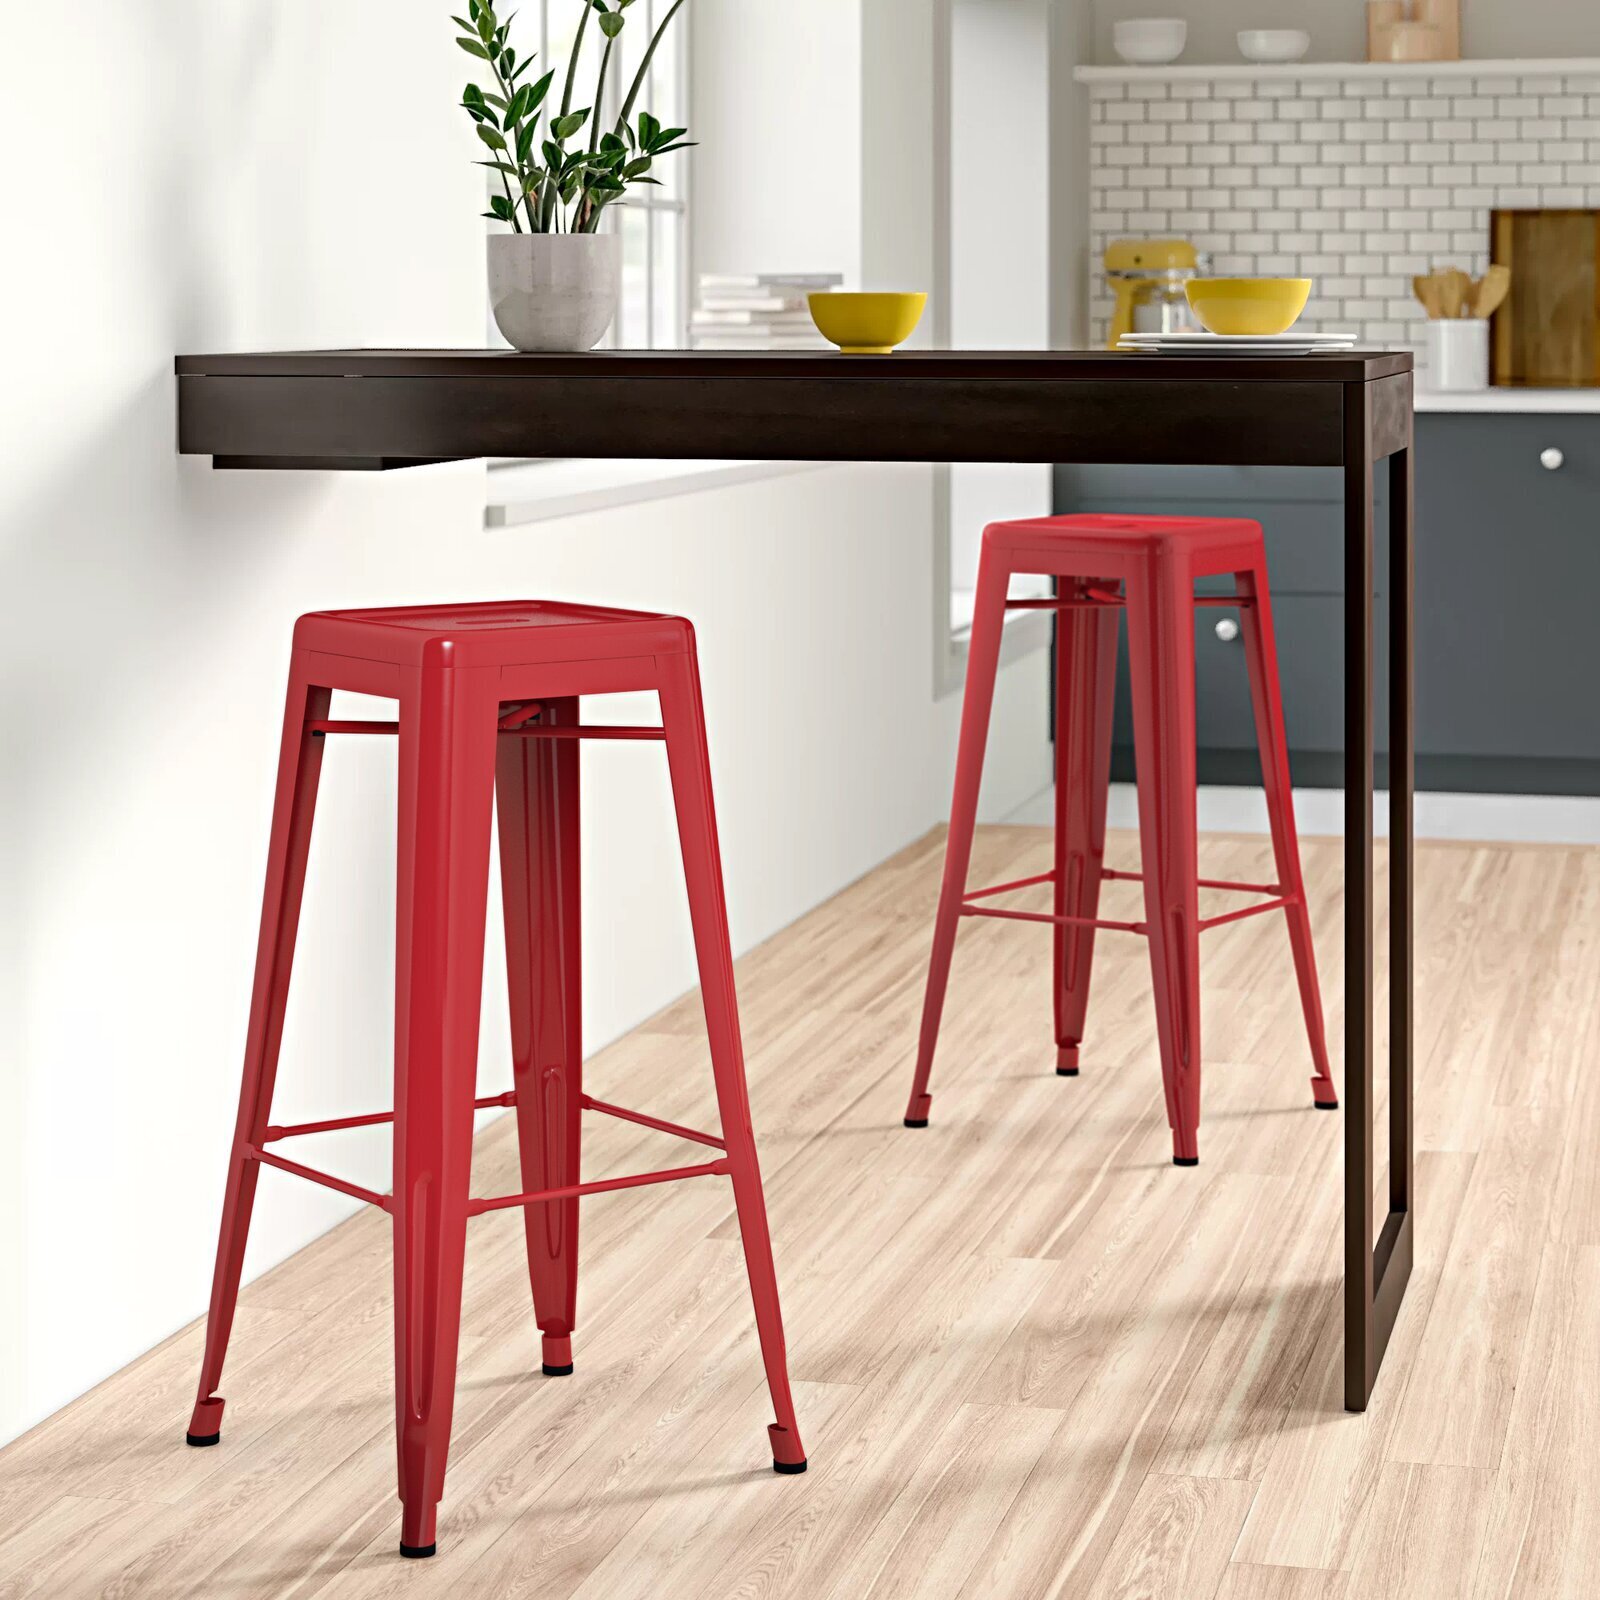 Steel Quirky Bar Stools